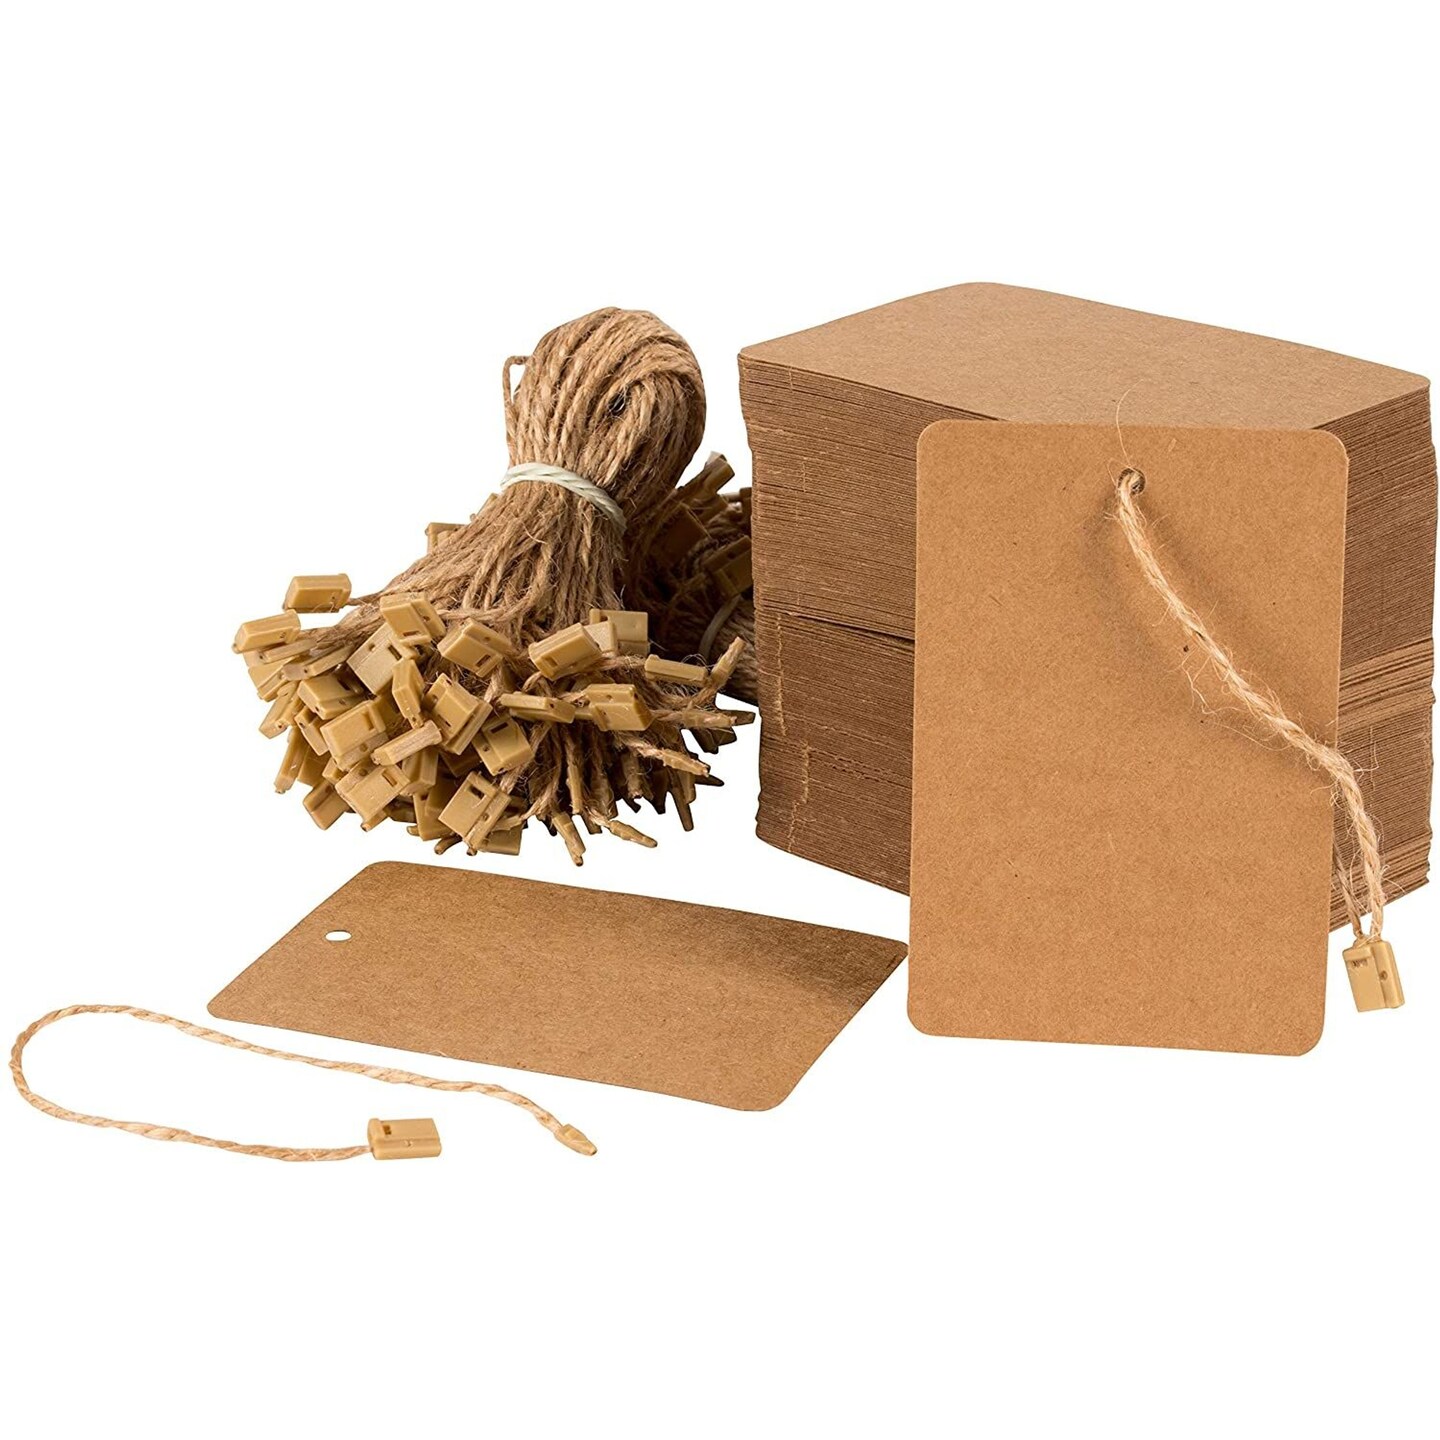 200 Pack Large Kraft Paper Gift Tags with Jute Strings for Weddings, Birthdays, Party Favors (Brown, 2 x 4 In)